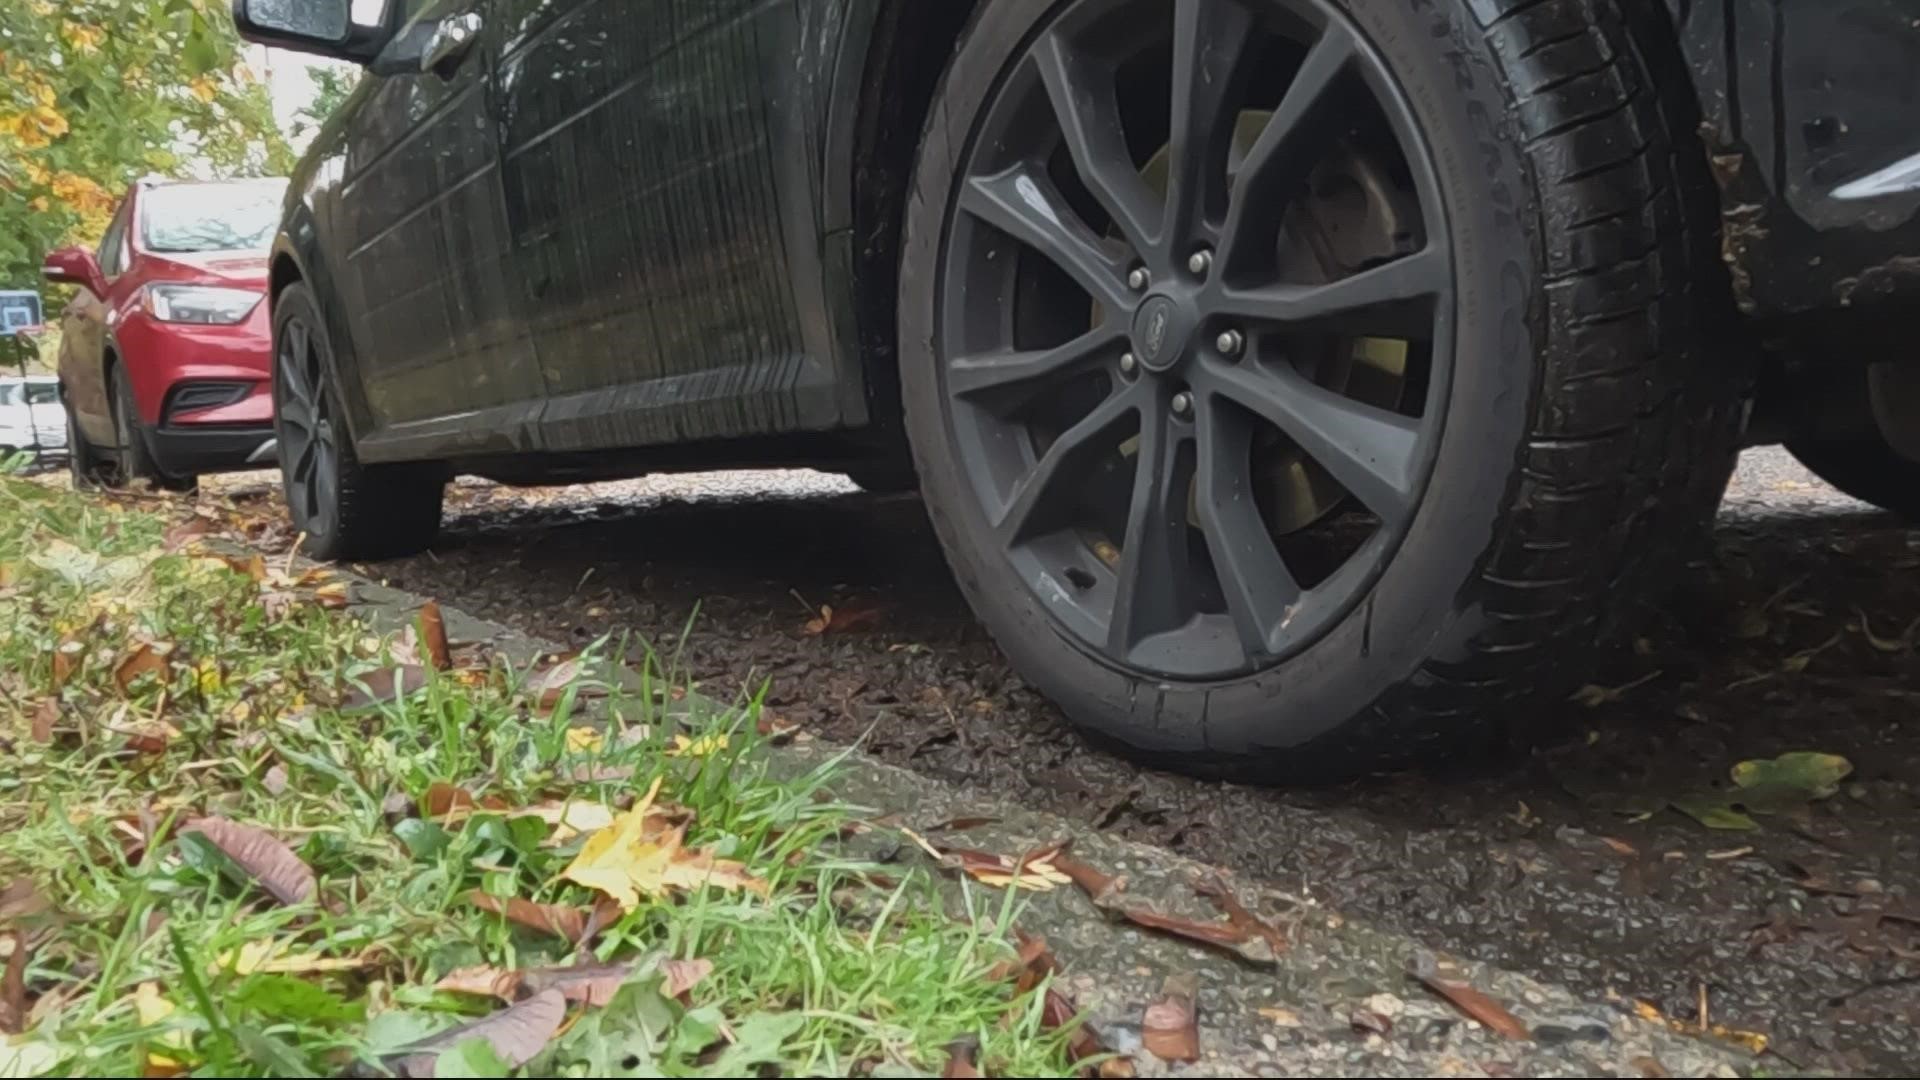 Climate activists deflated some tires in a Southeast Portland neighborhood leaving a note behind justifying the act in the name of climate change and pollution.